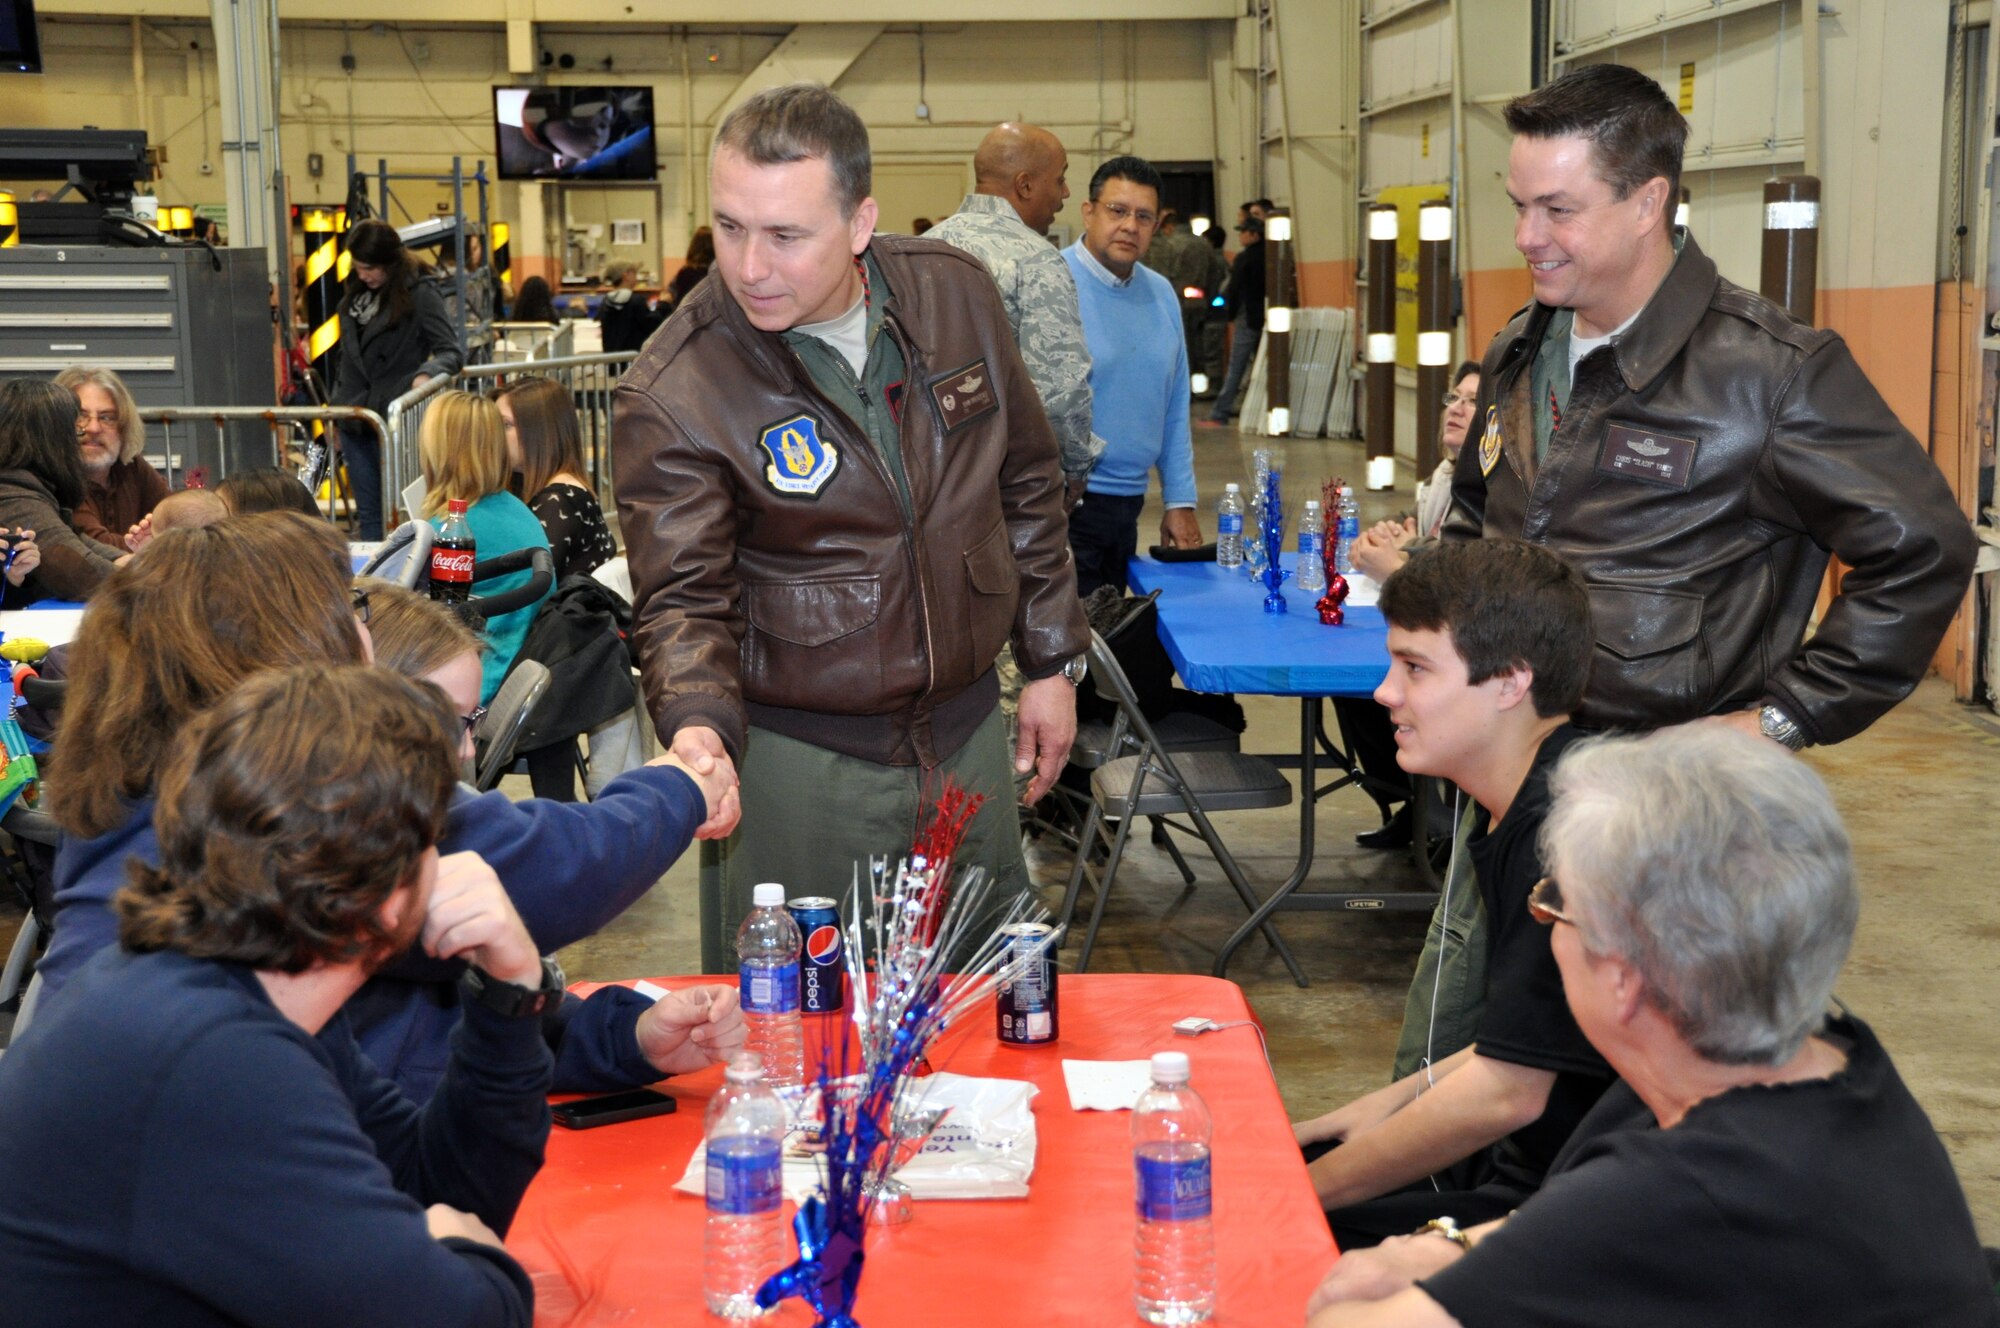 (center) Col. John Breazeale, 301st Fighter Wing commander, and (right standing) Col Chris Yancy, 301st FW vice commander, visit with families before the aircraft arrived carrying nearly 300 Air Force Reserve Airmen. Reservists from the 301st and 482nd Fighter Wing returned to chilly temperatures and a warm welcome home. Family members and friends displayed signs anticipating their loved-one's arrival from Afghanistan where they were deployed in support of Operation Enduring Freedom. (U.S. Air Force photo/MSgt Josh Woods)